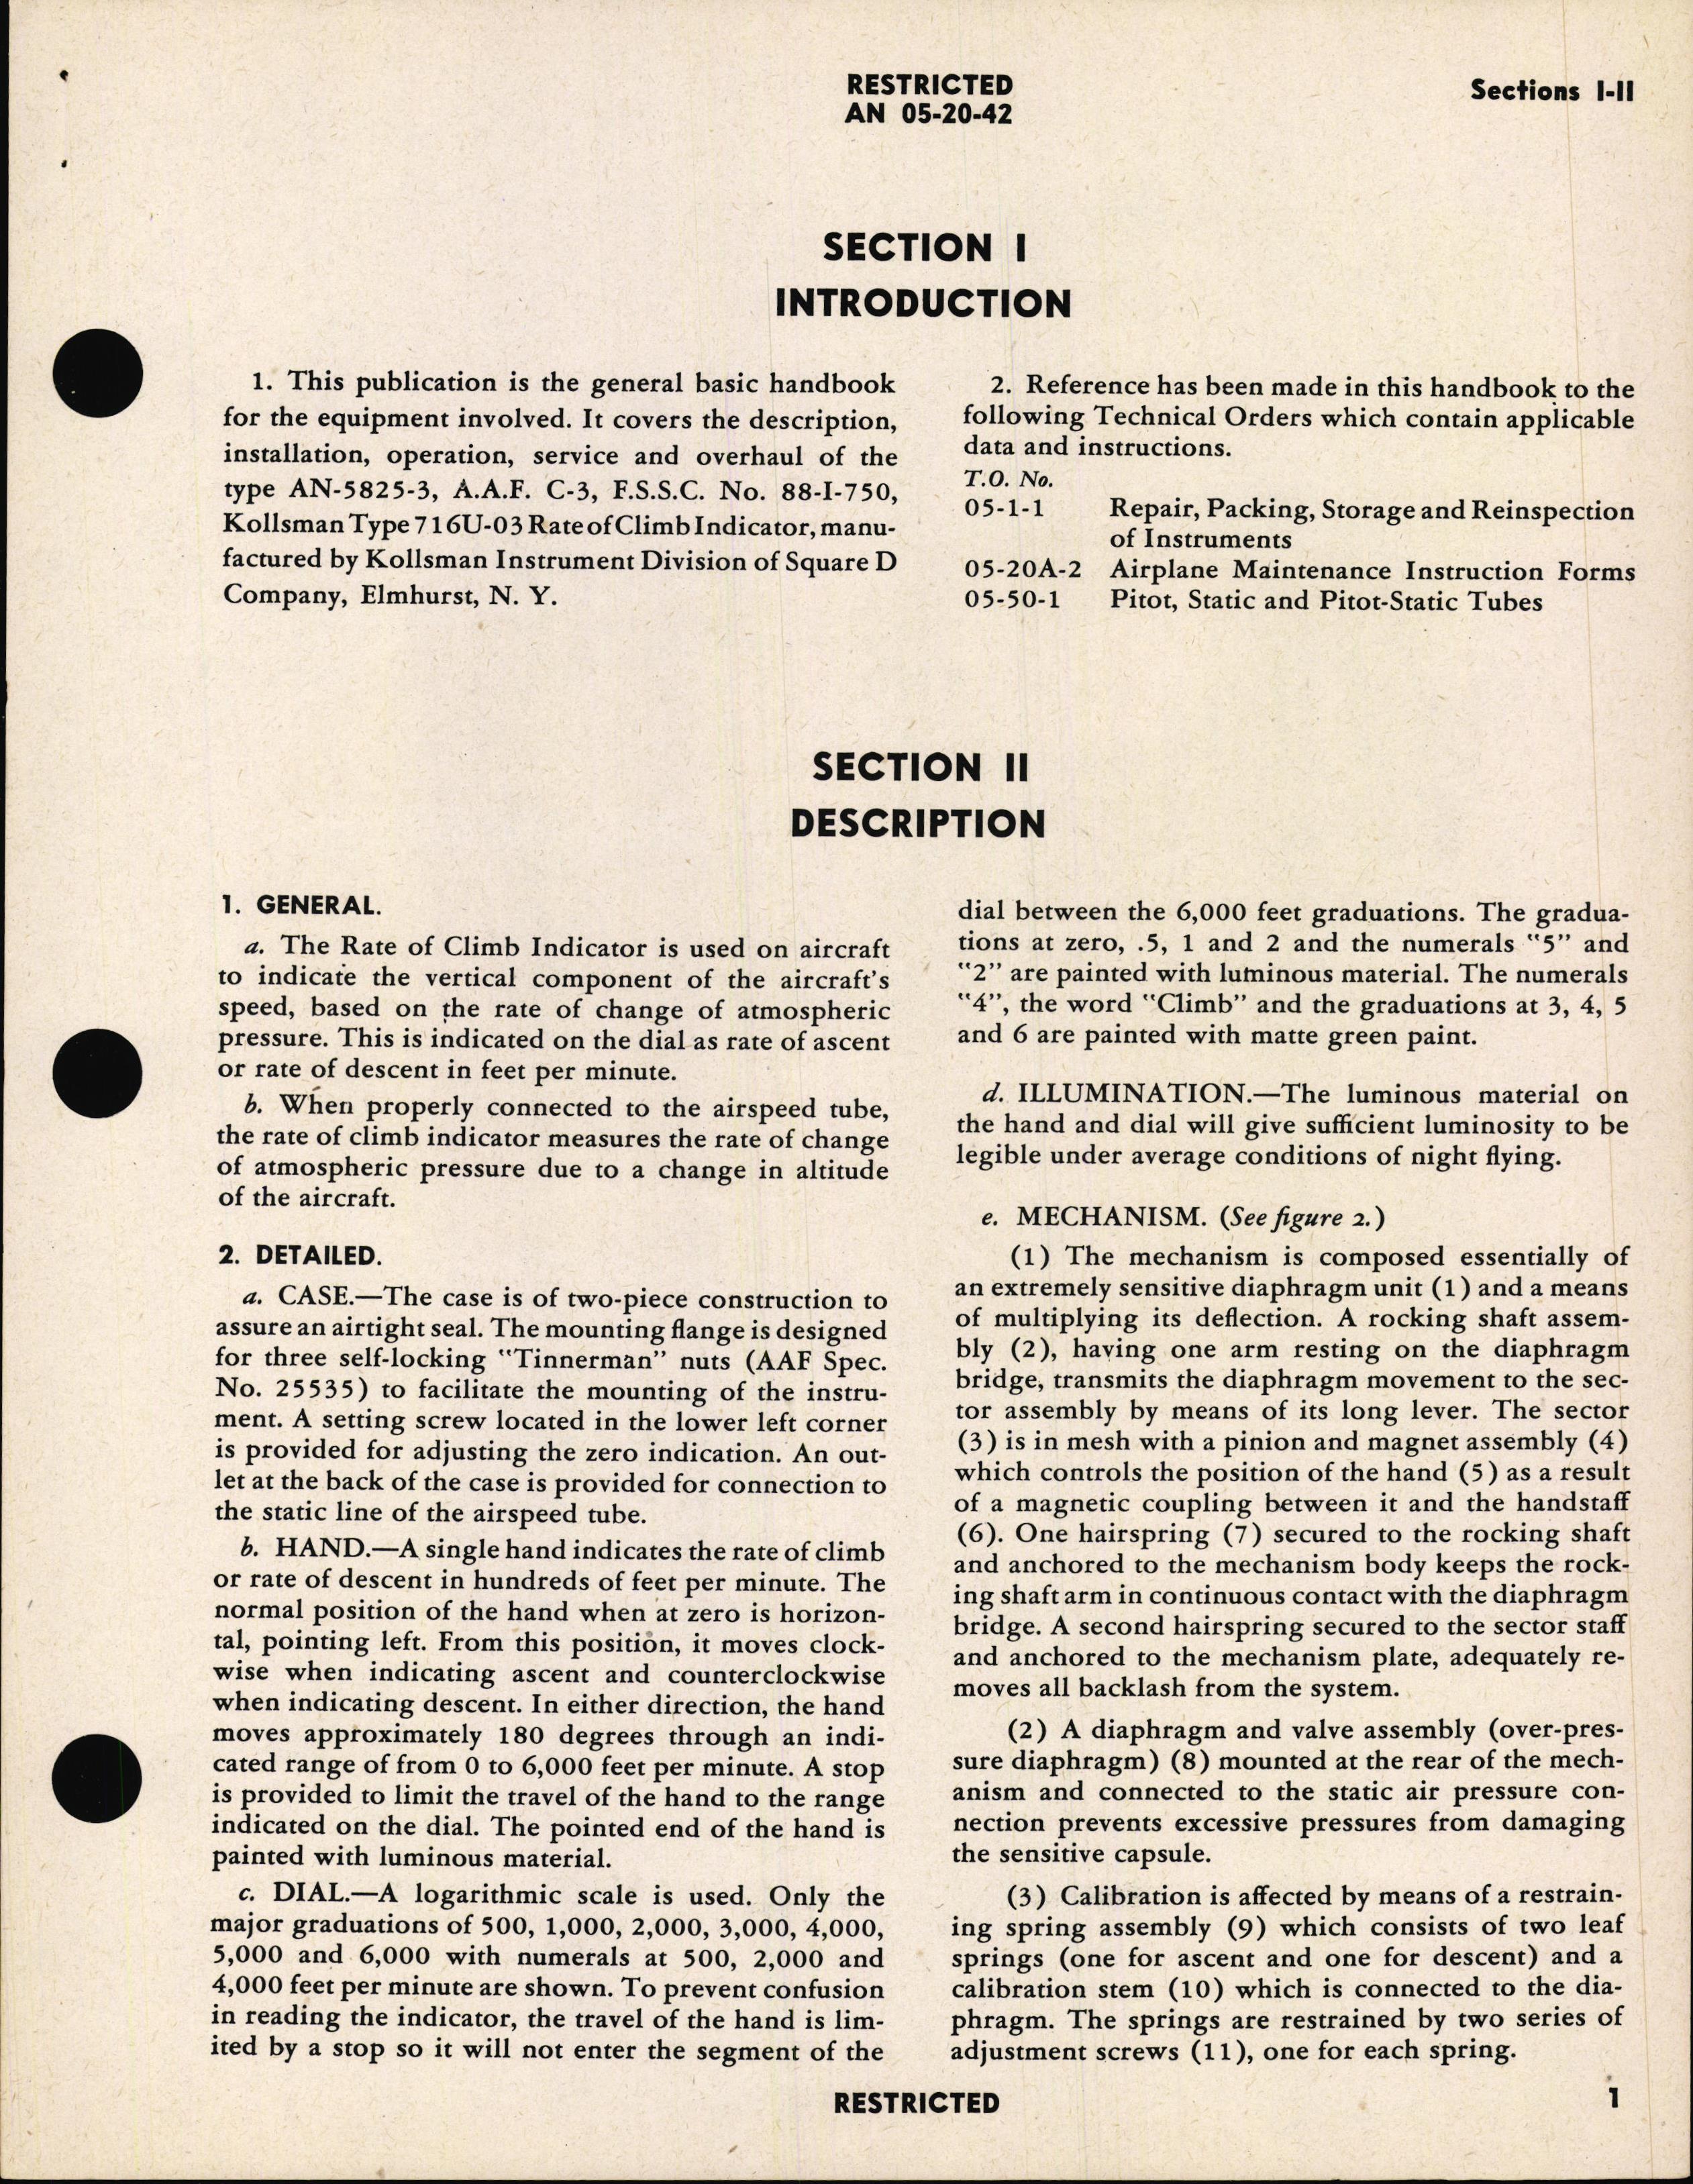 Sample page 5 from AirCorps Library document: Handbook of Instructions with Parts Catalog for Type C-3 Rate of Climb Indicator